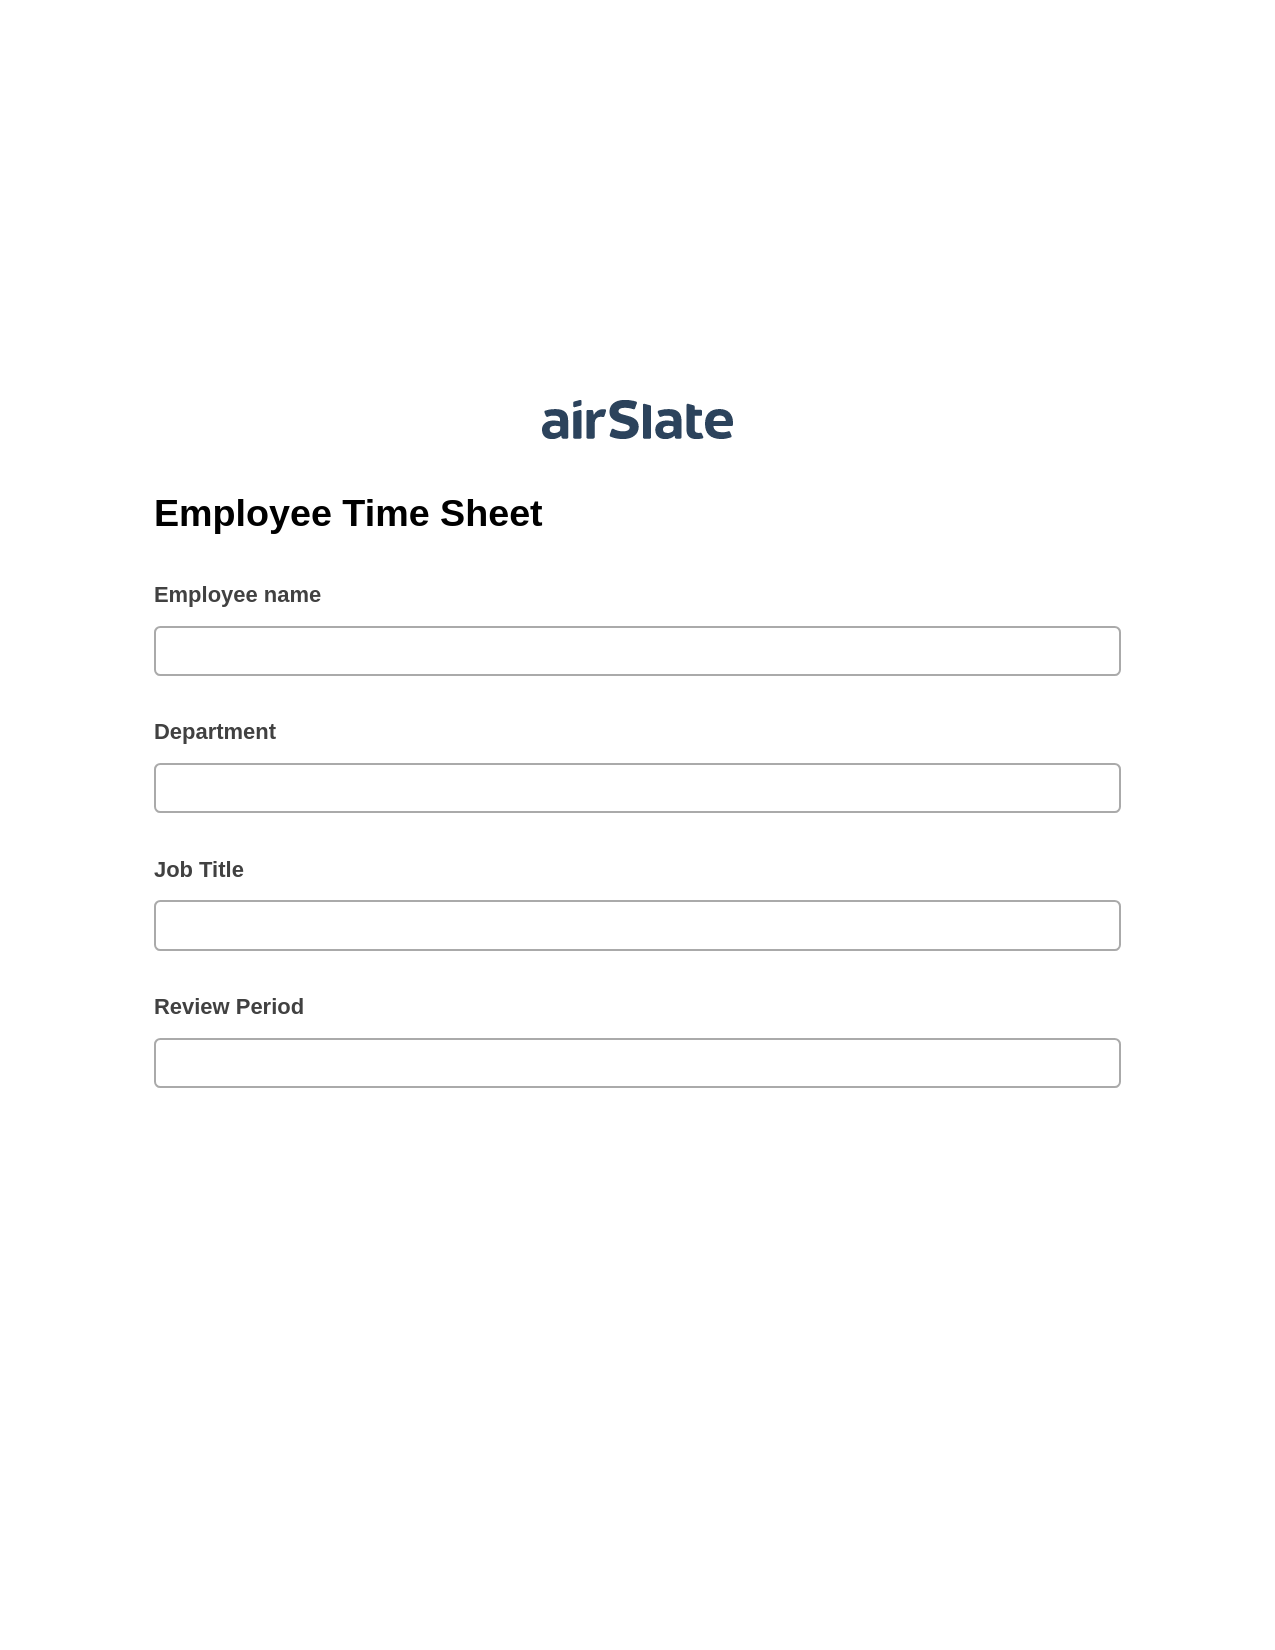 Employee Time Sheet Pre-fill from MS Dynamics 365 Records, System Bot - Create a Slate in another Flow, Archive to OneDrive Bot